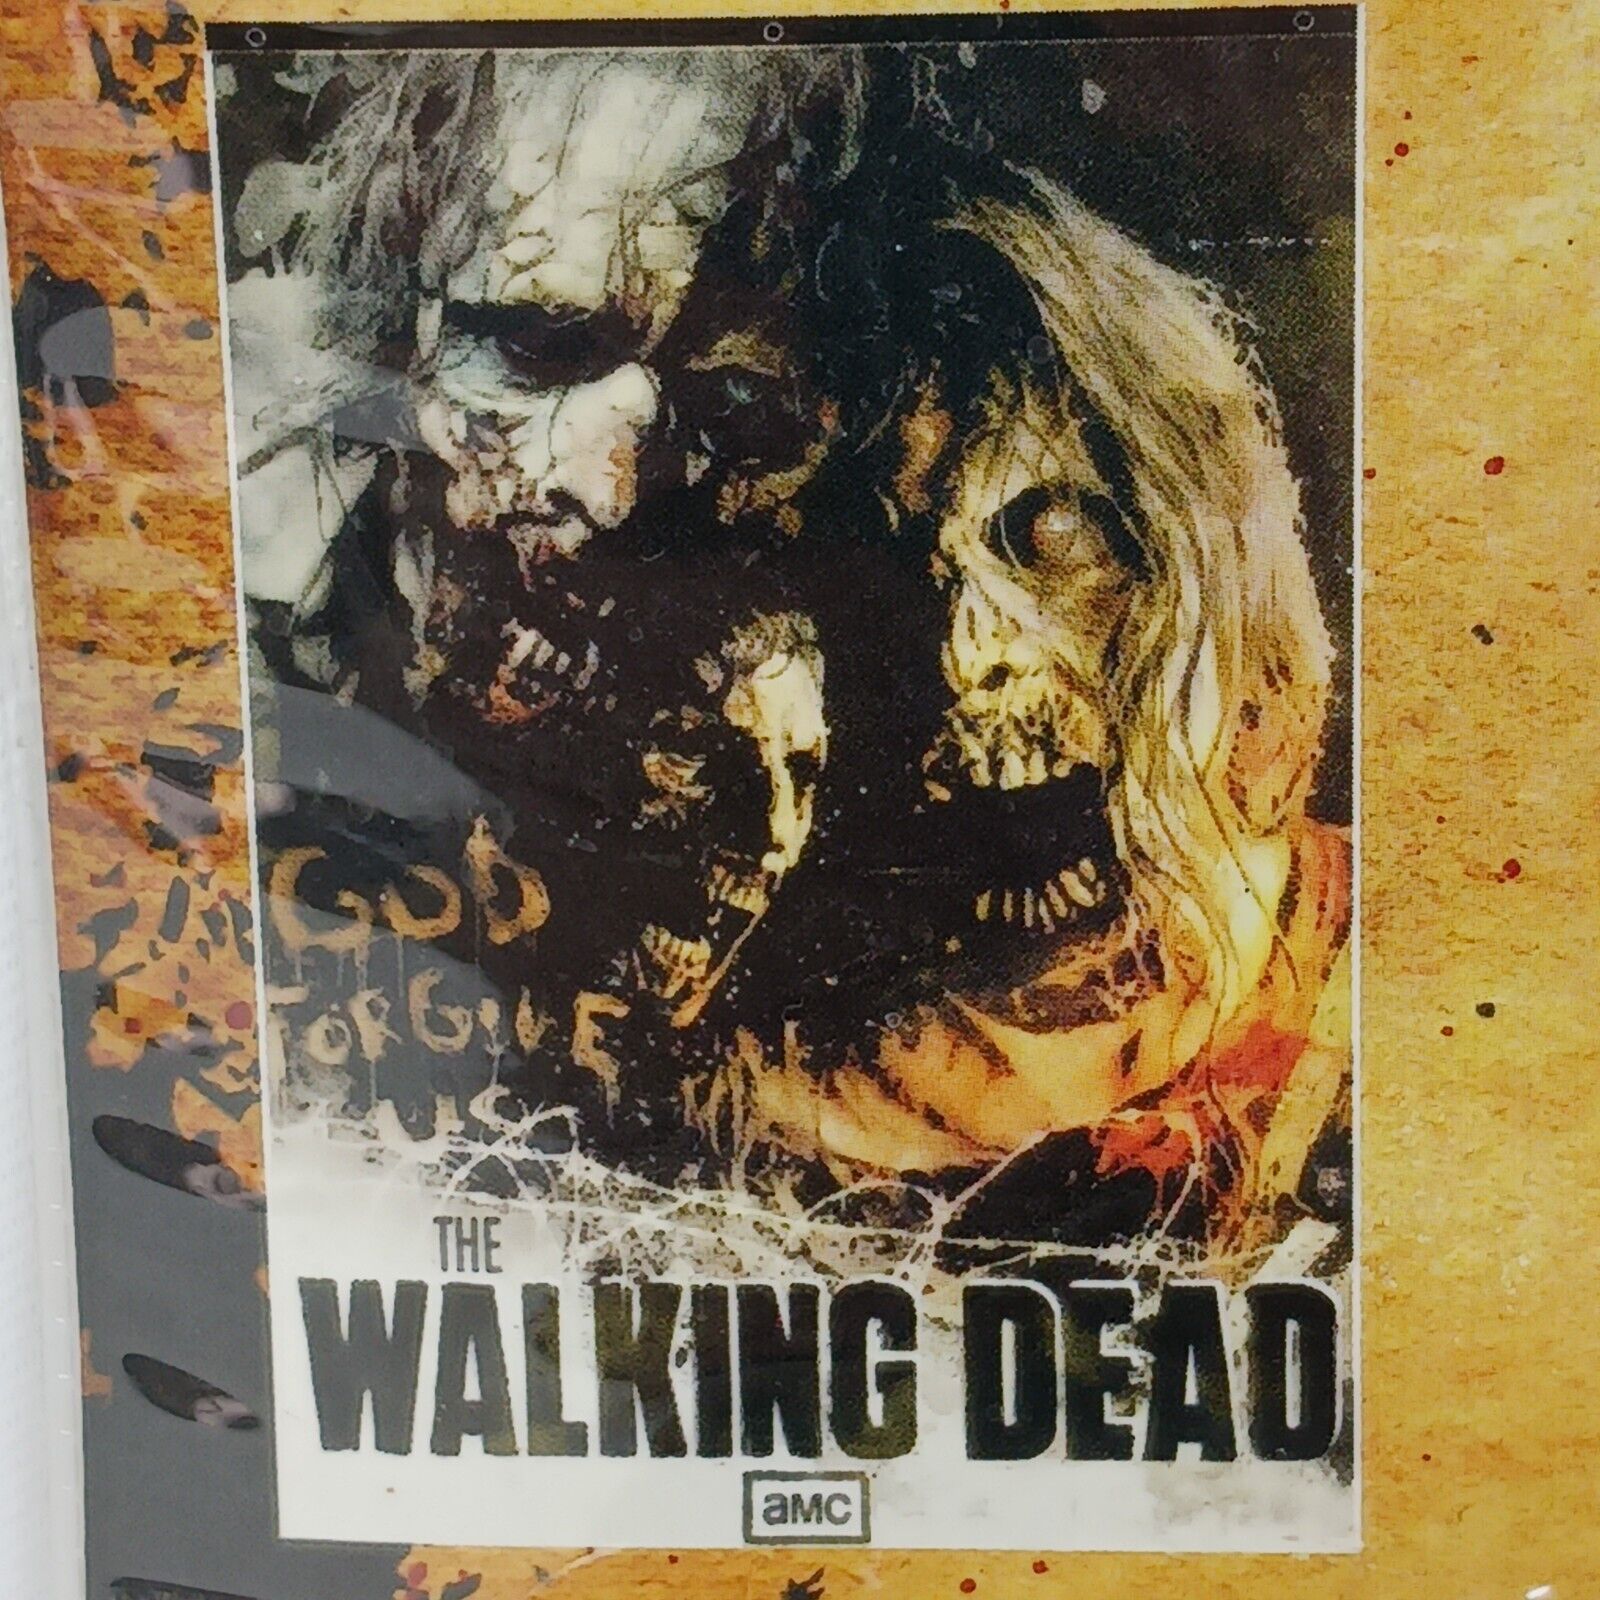 NEW LARGE WALKING DEAD ZOMBIE WALL BANNER HALLOWEEN 84in X 60in TAPESTRY BANNER